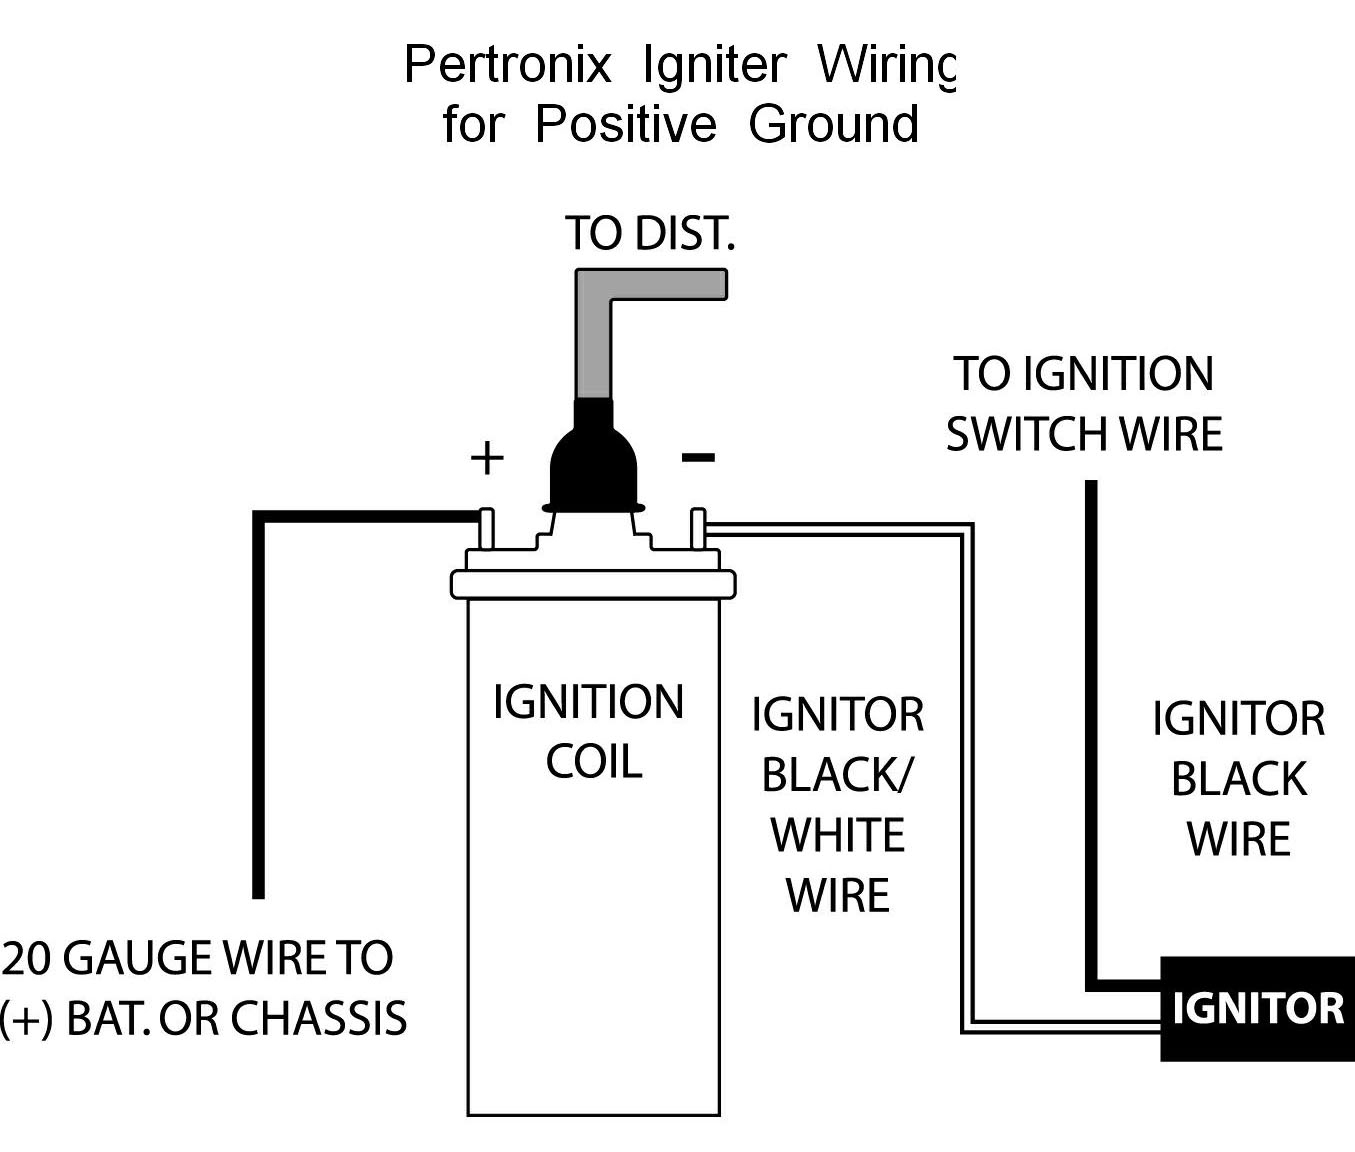 Pertronix Positive Ground Wiring - Pertronix Ignitor Wiring Diagram